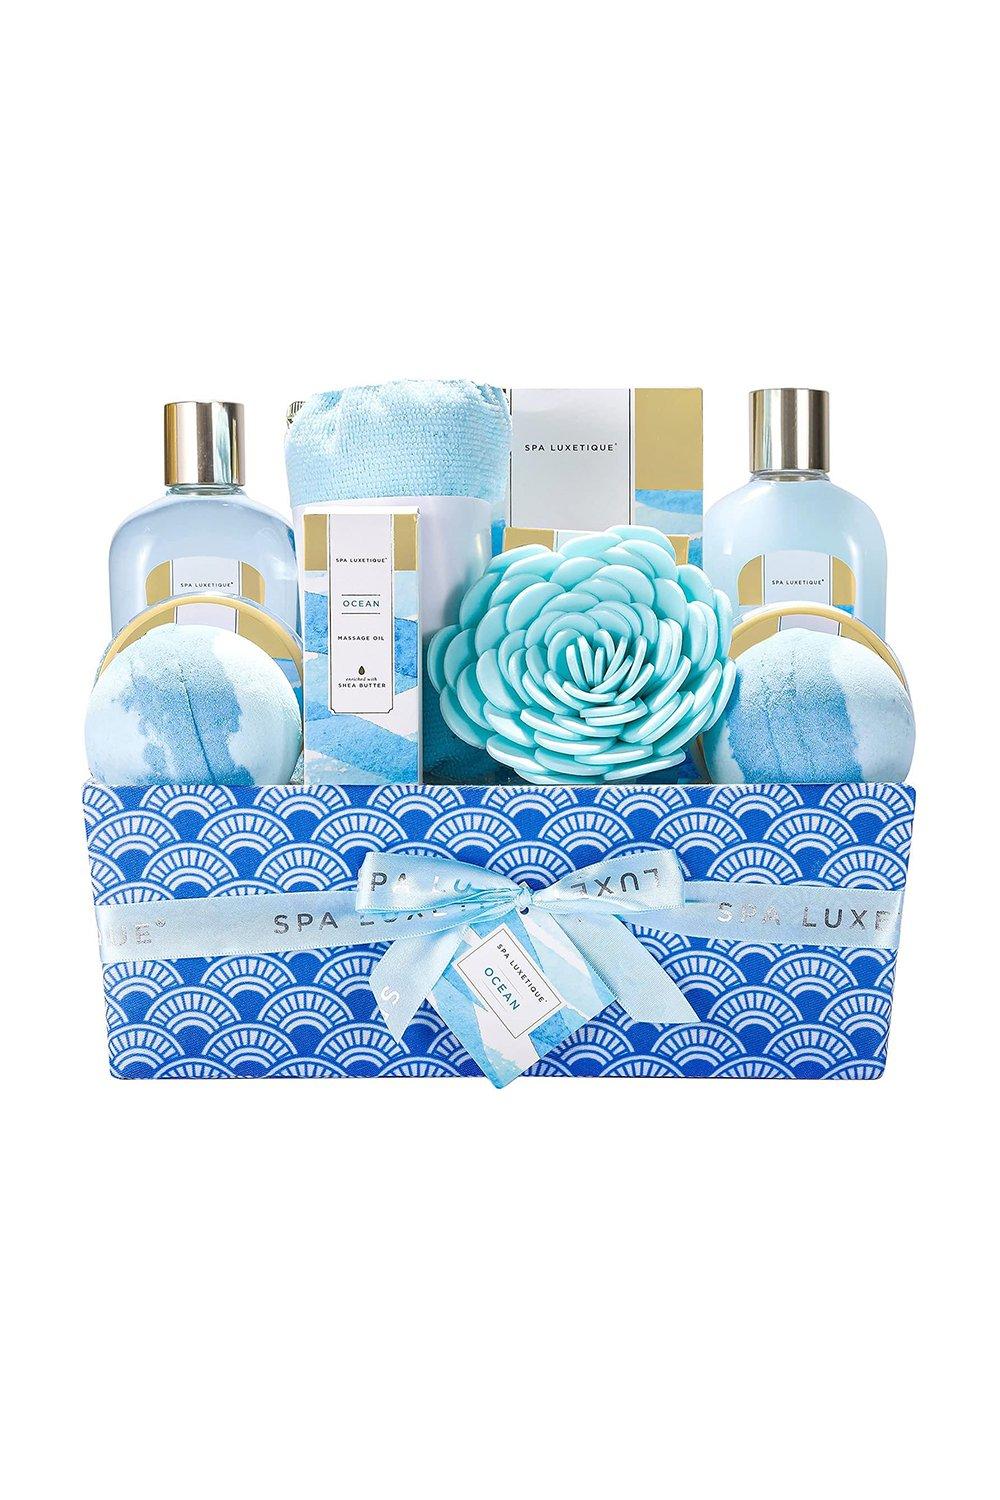 12 Pcs Ocean Scented Home Bath Gift Set with Massage Oil and Bath Bombs